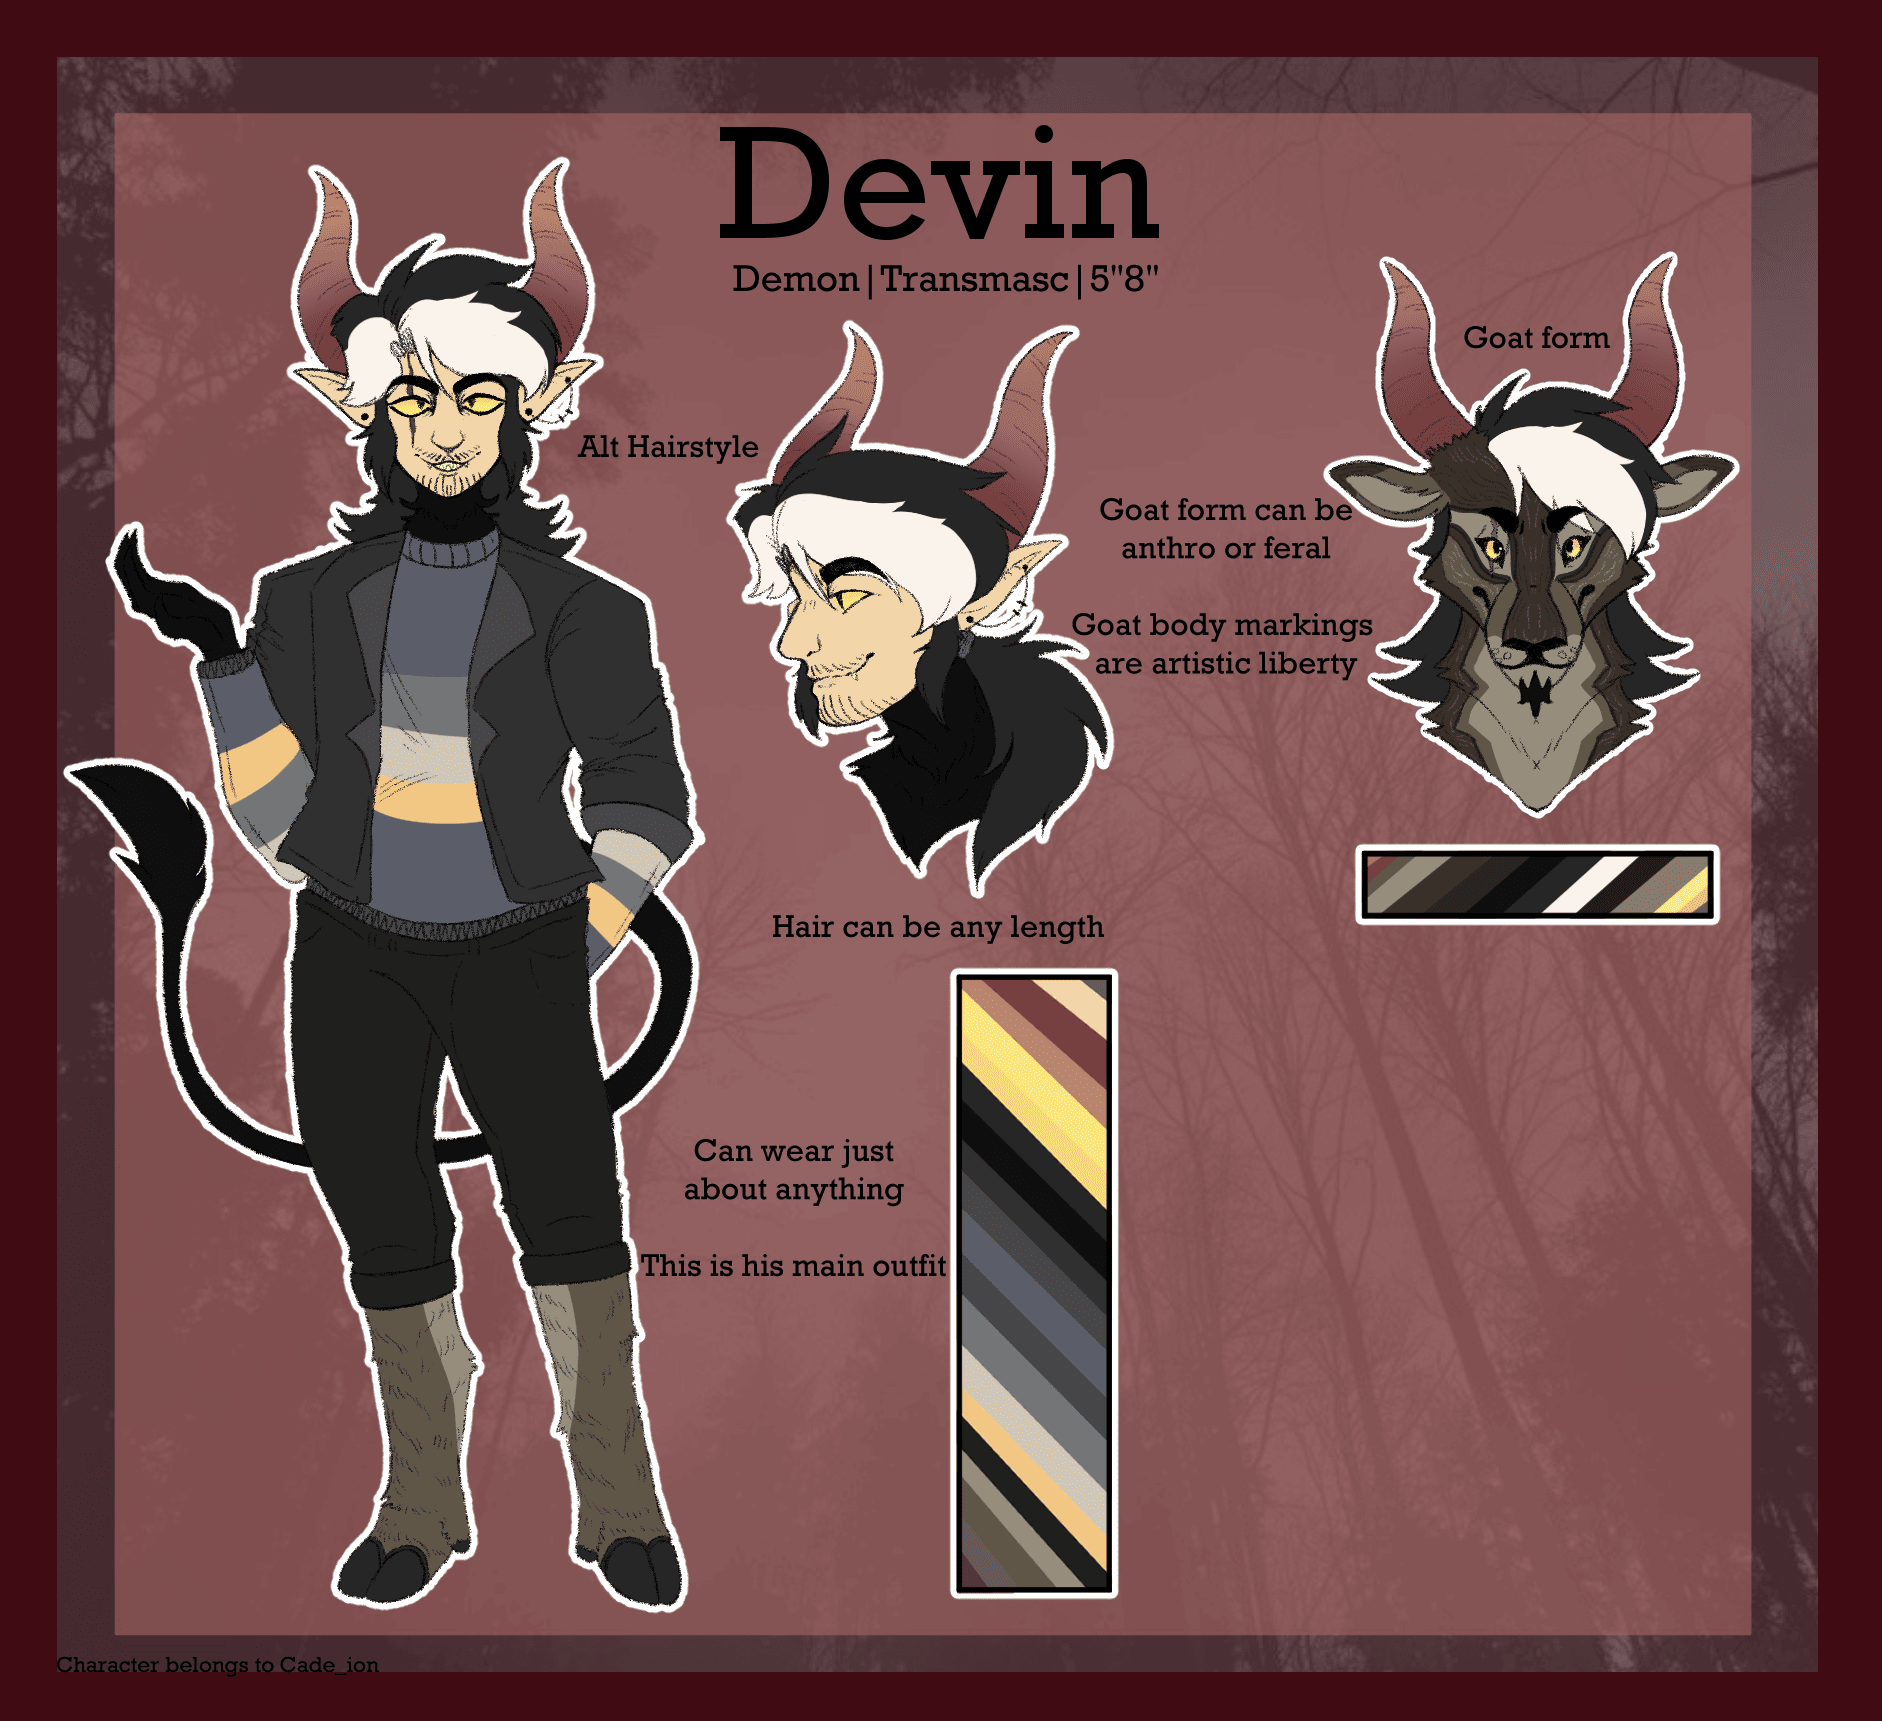 a reference sheet of my secondary sona devin with a goat form bust and a drawing showing his main demon design with red horns, long black hair, and a grey sweater